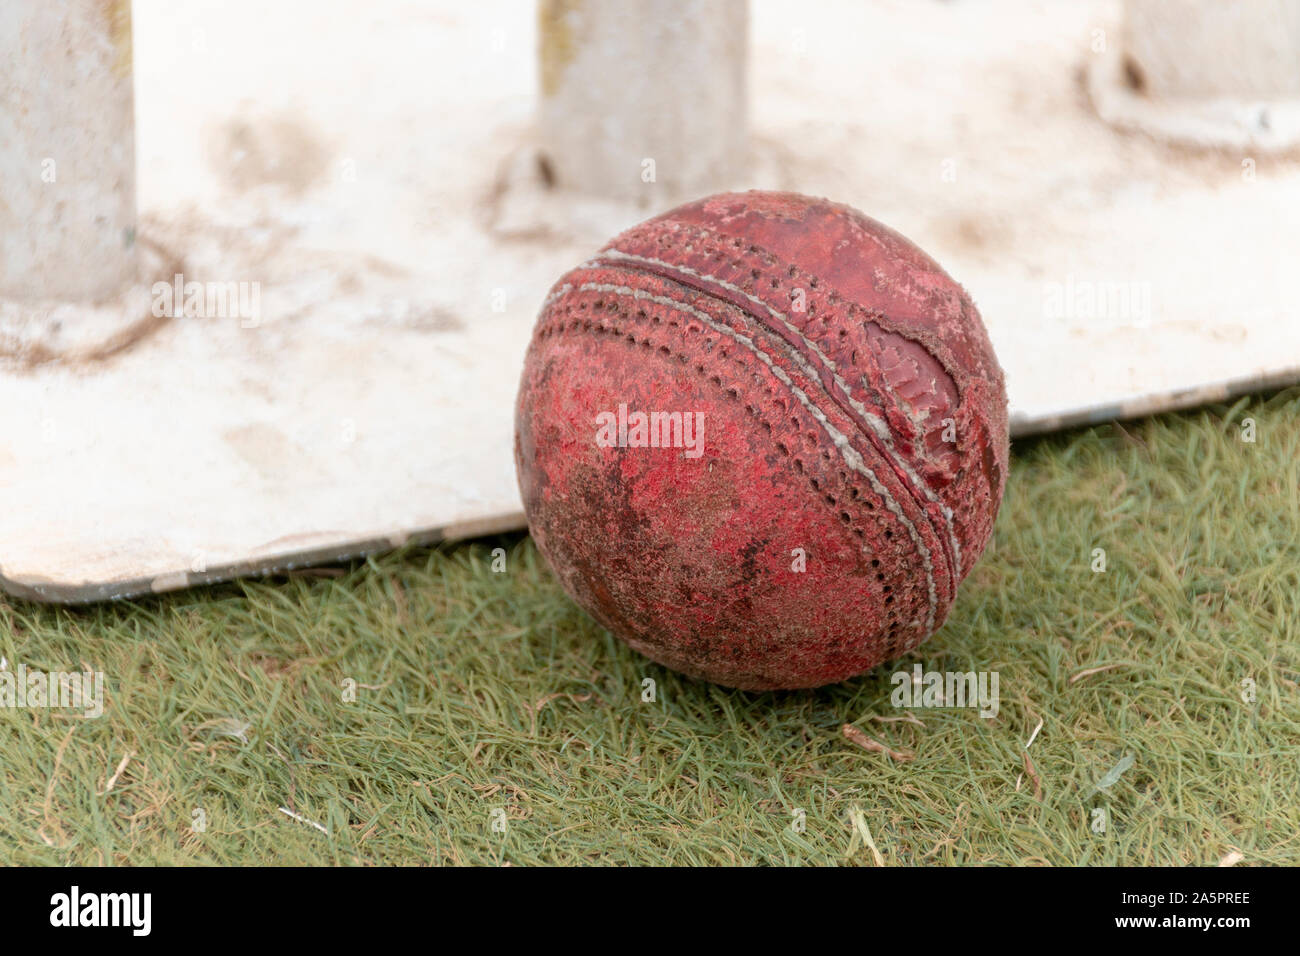 A close up view of a old well used red cricket ball on a grass pitch next to white metal wickets Stock Photo